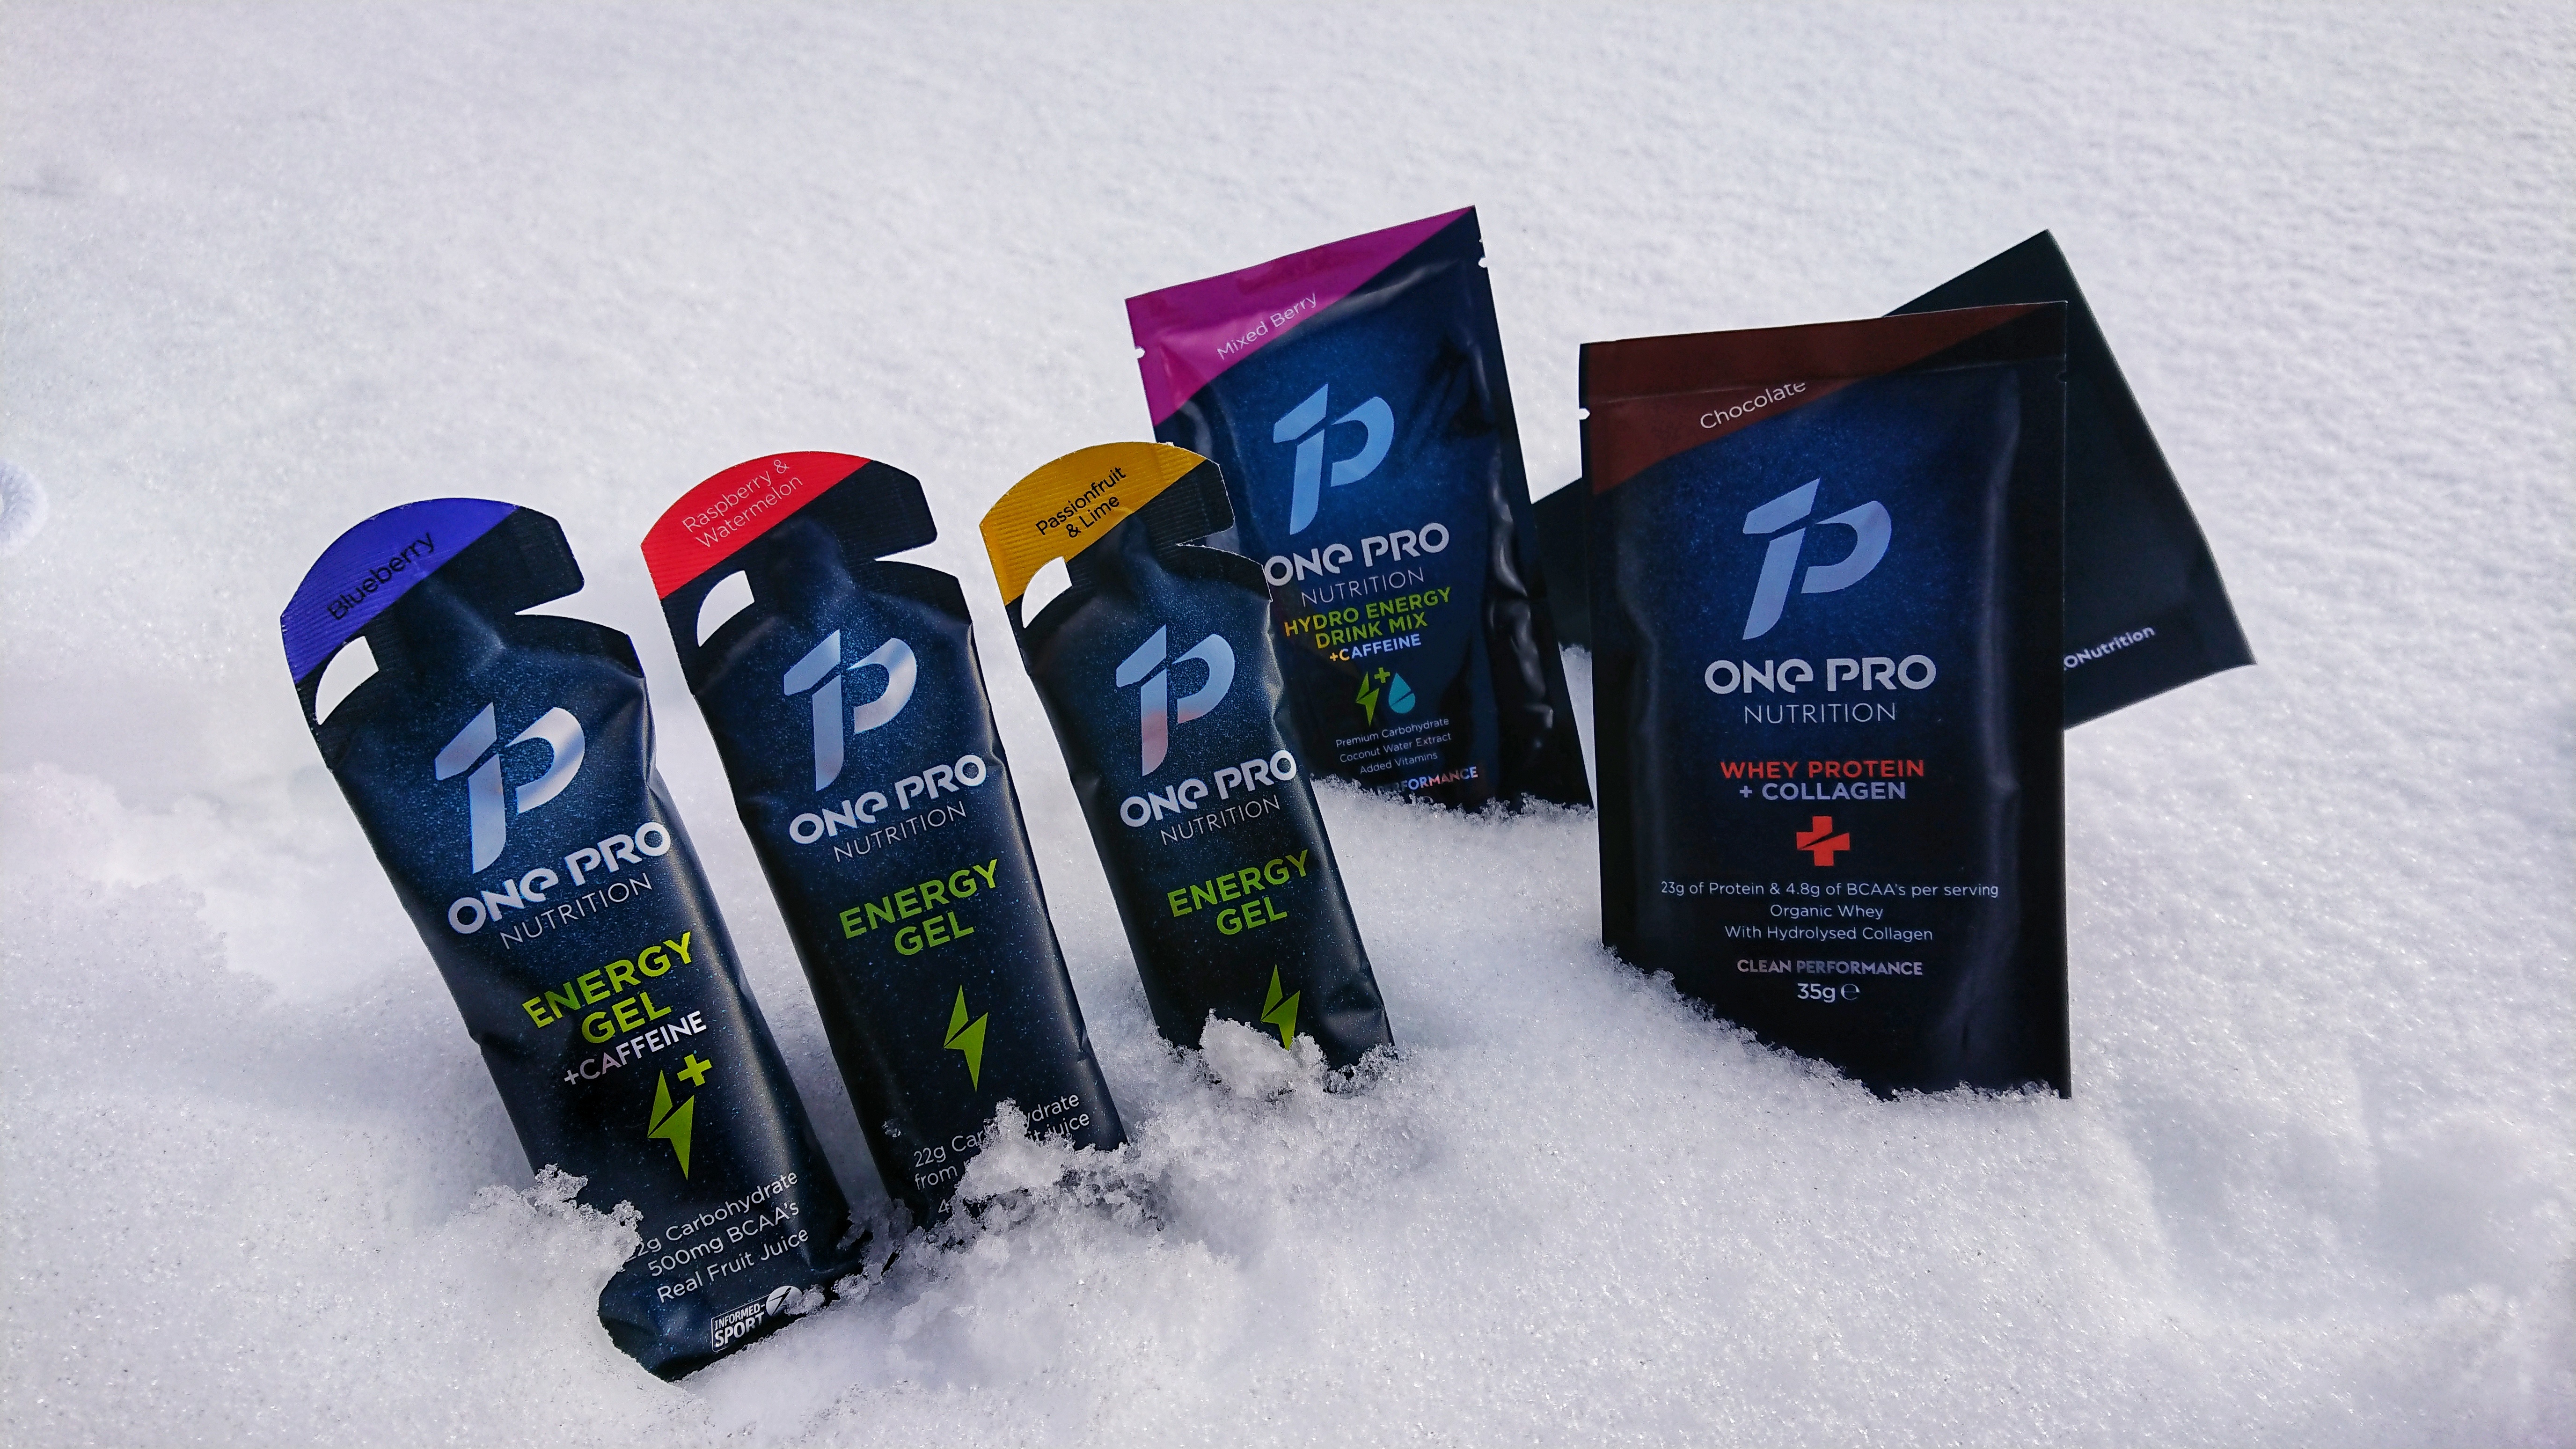 Energy gels, drinks and protein shakes from ONE PRO Nutrition